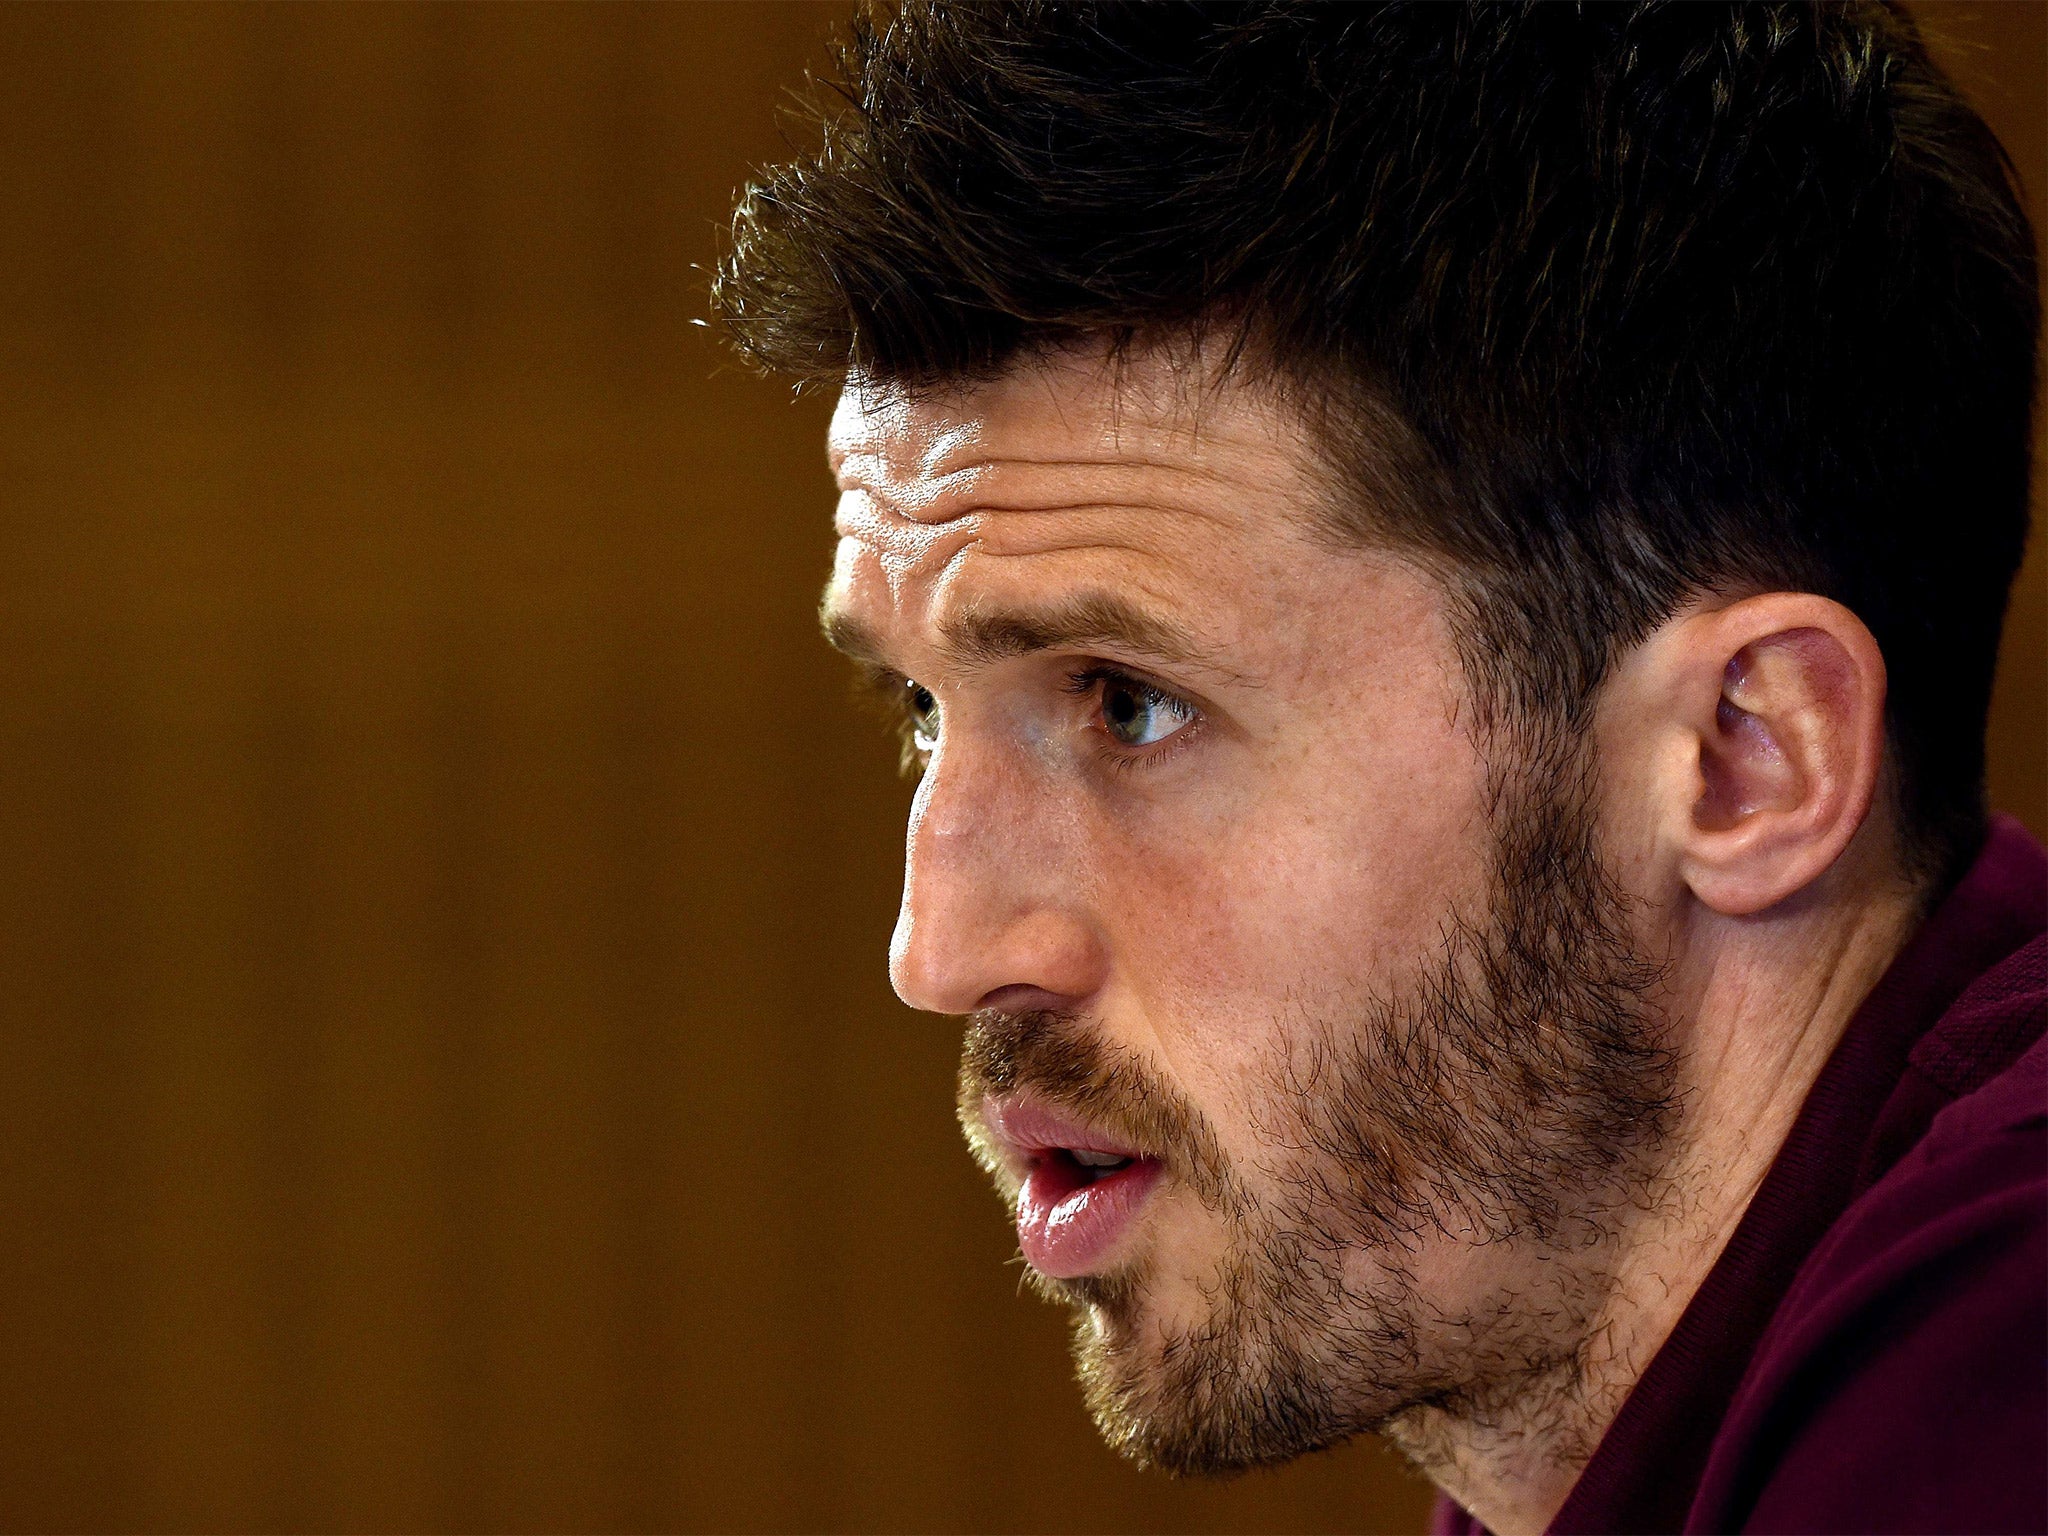 Michael Carrick wants one last hurrah at a major tournament with England